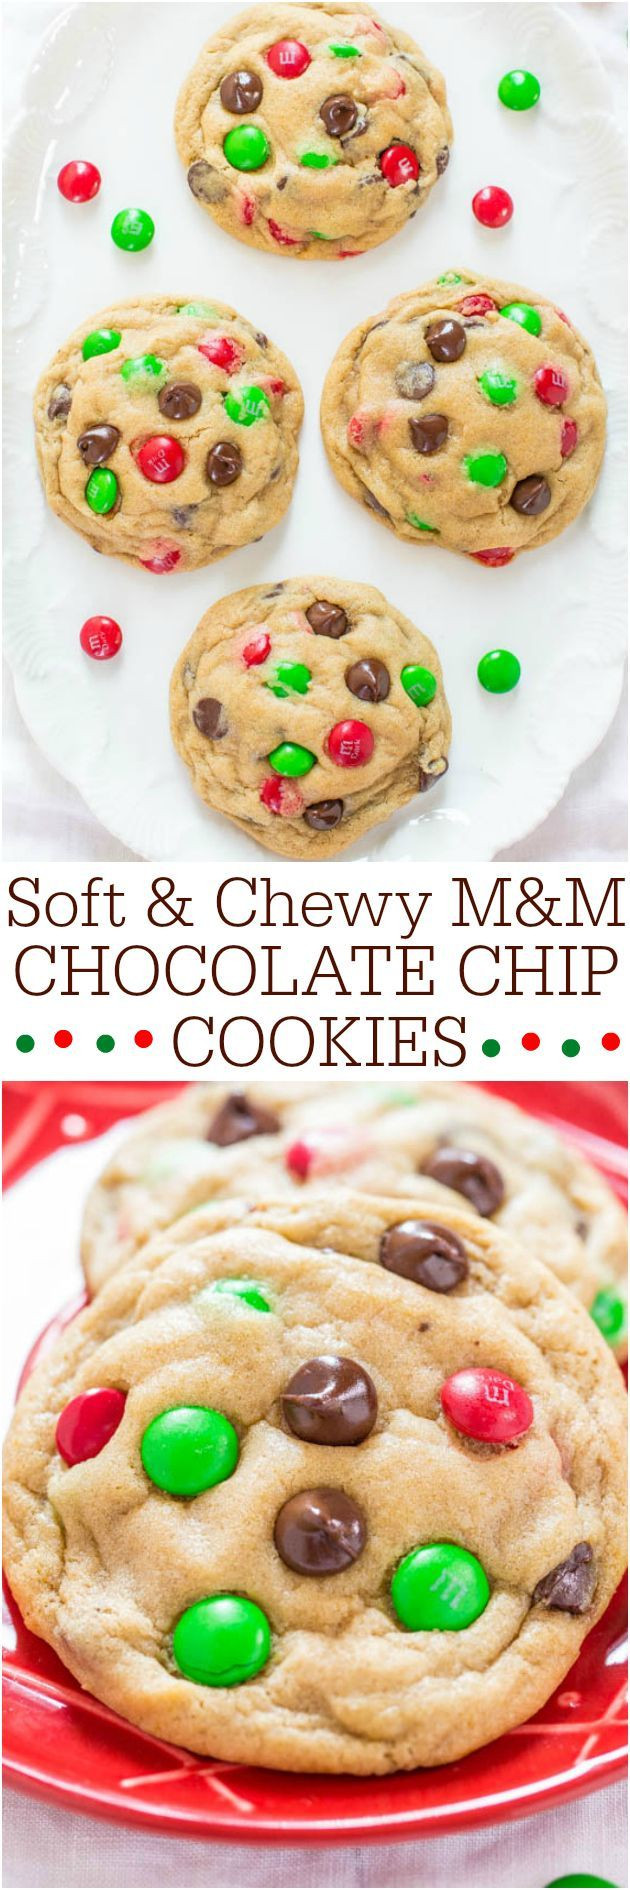 M&amp;M Sugar Cookies
 Soft and Chewy M&M Chocolate Chip Cookies